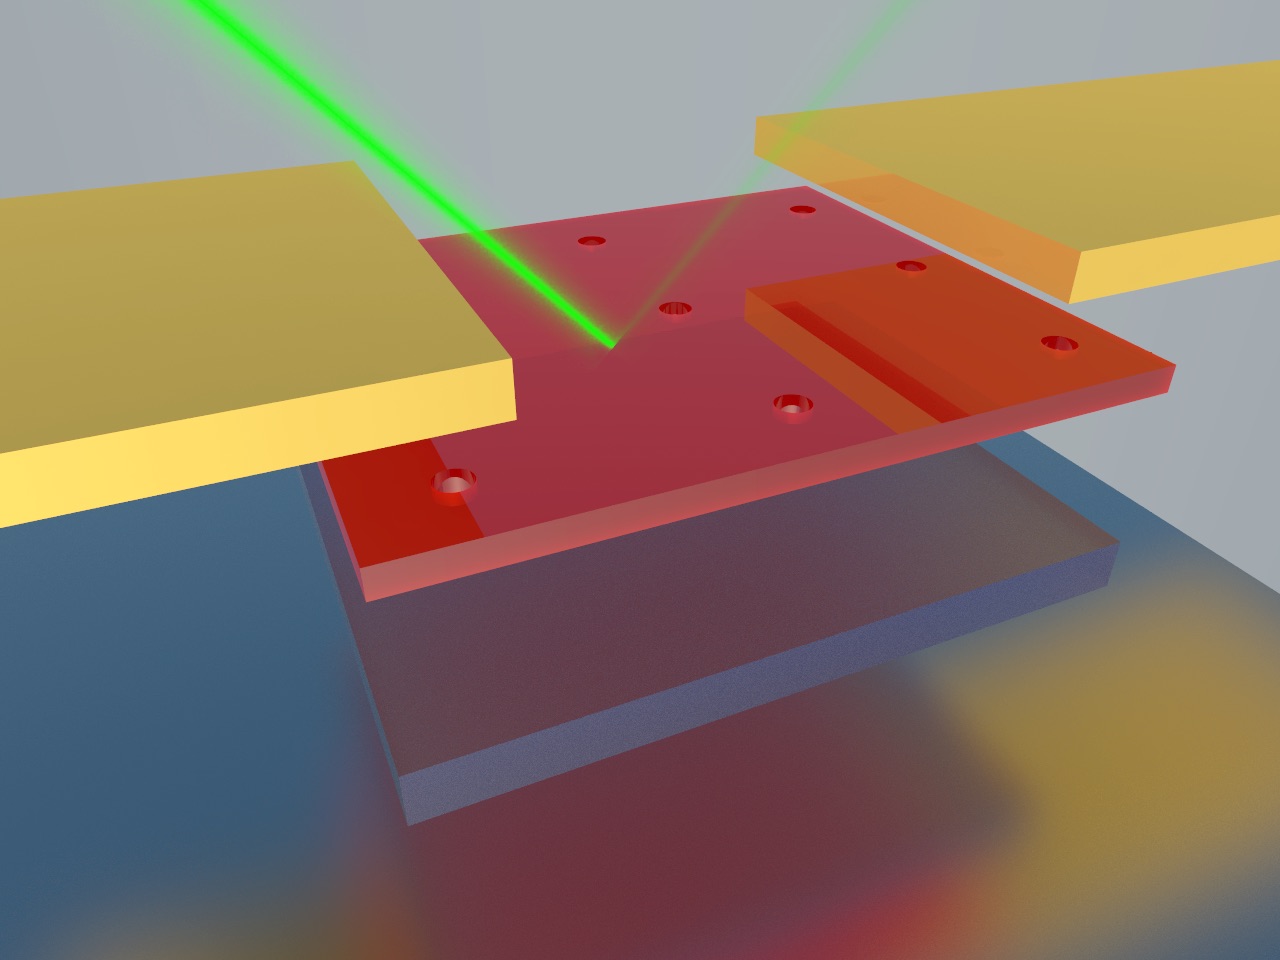 Tuned to absorb specific light wavelengths, the new photodetector consists of nanocavities sandwiched between a ultrathin single-crystal germanium top layer and reflective silver on the bottom